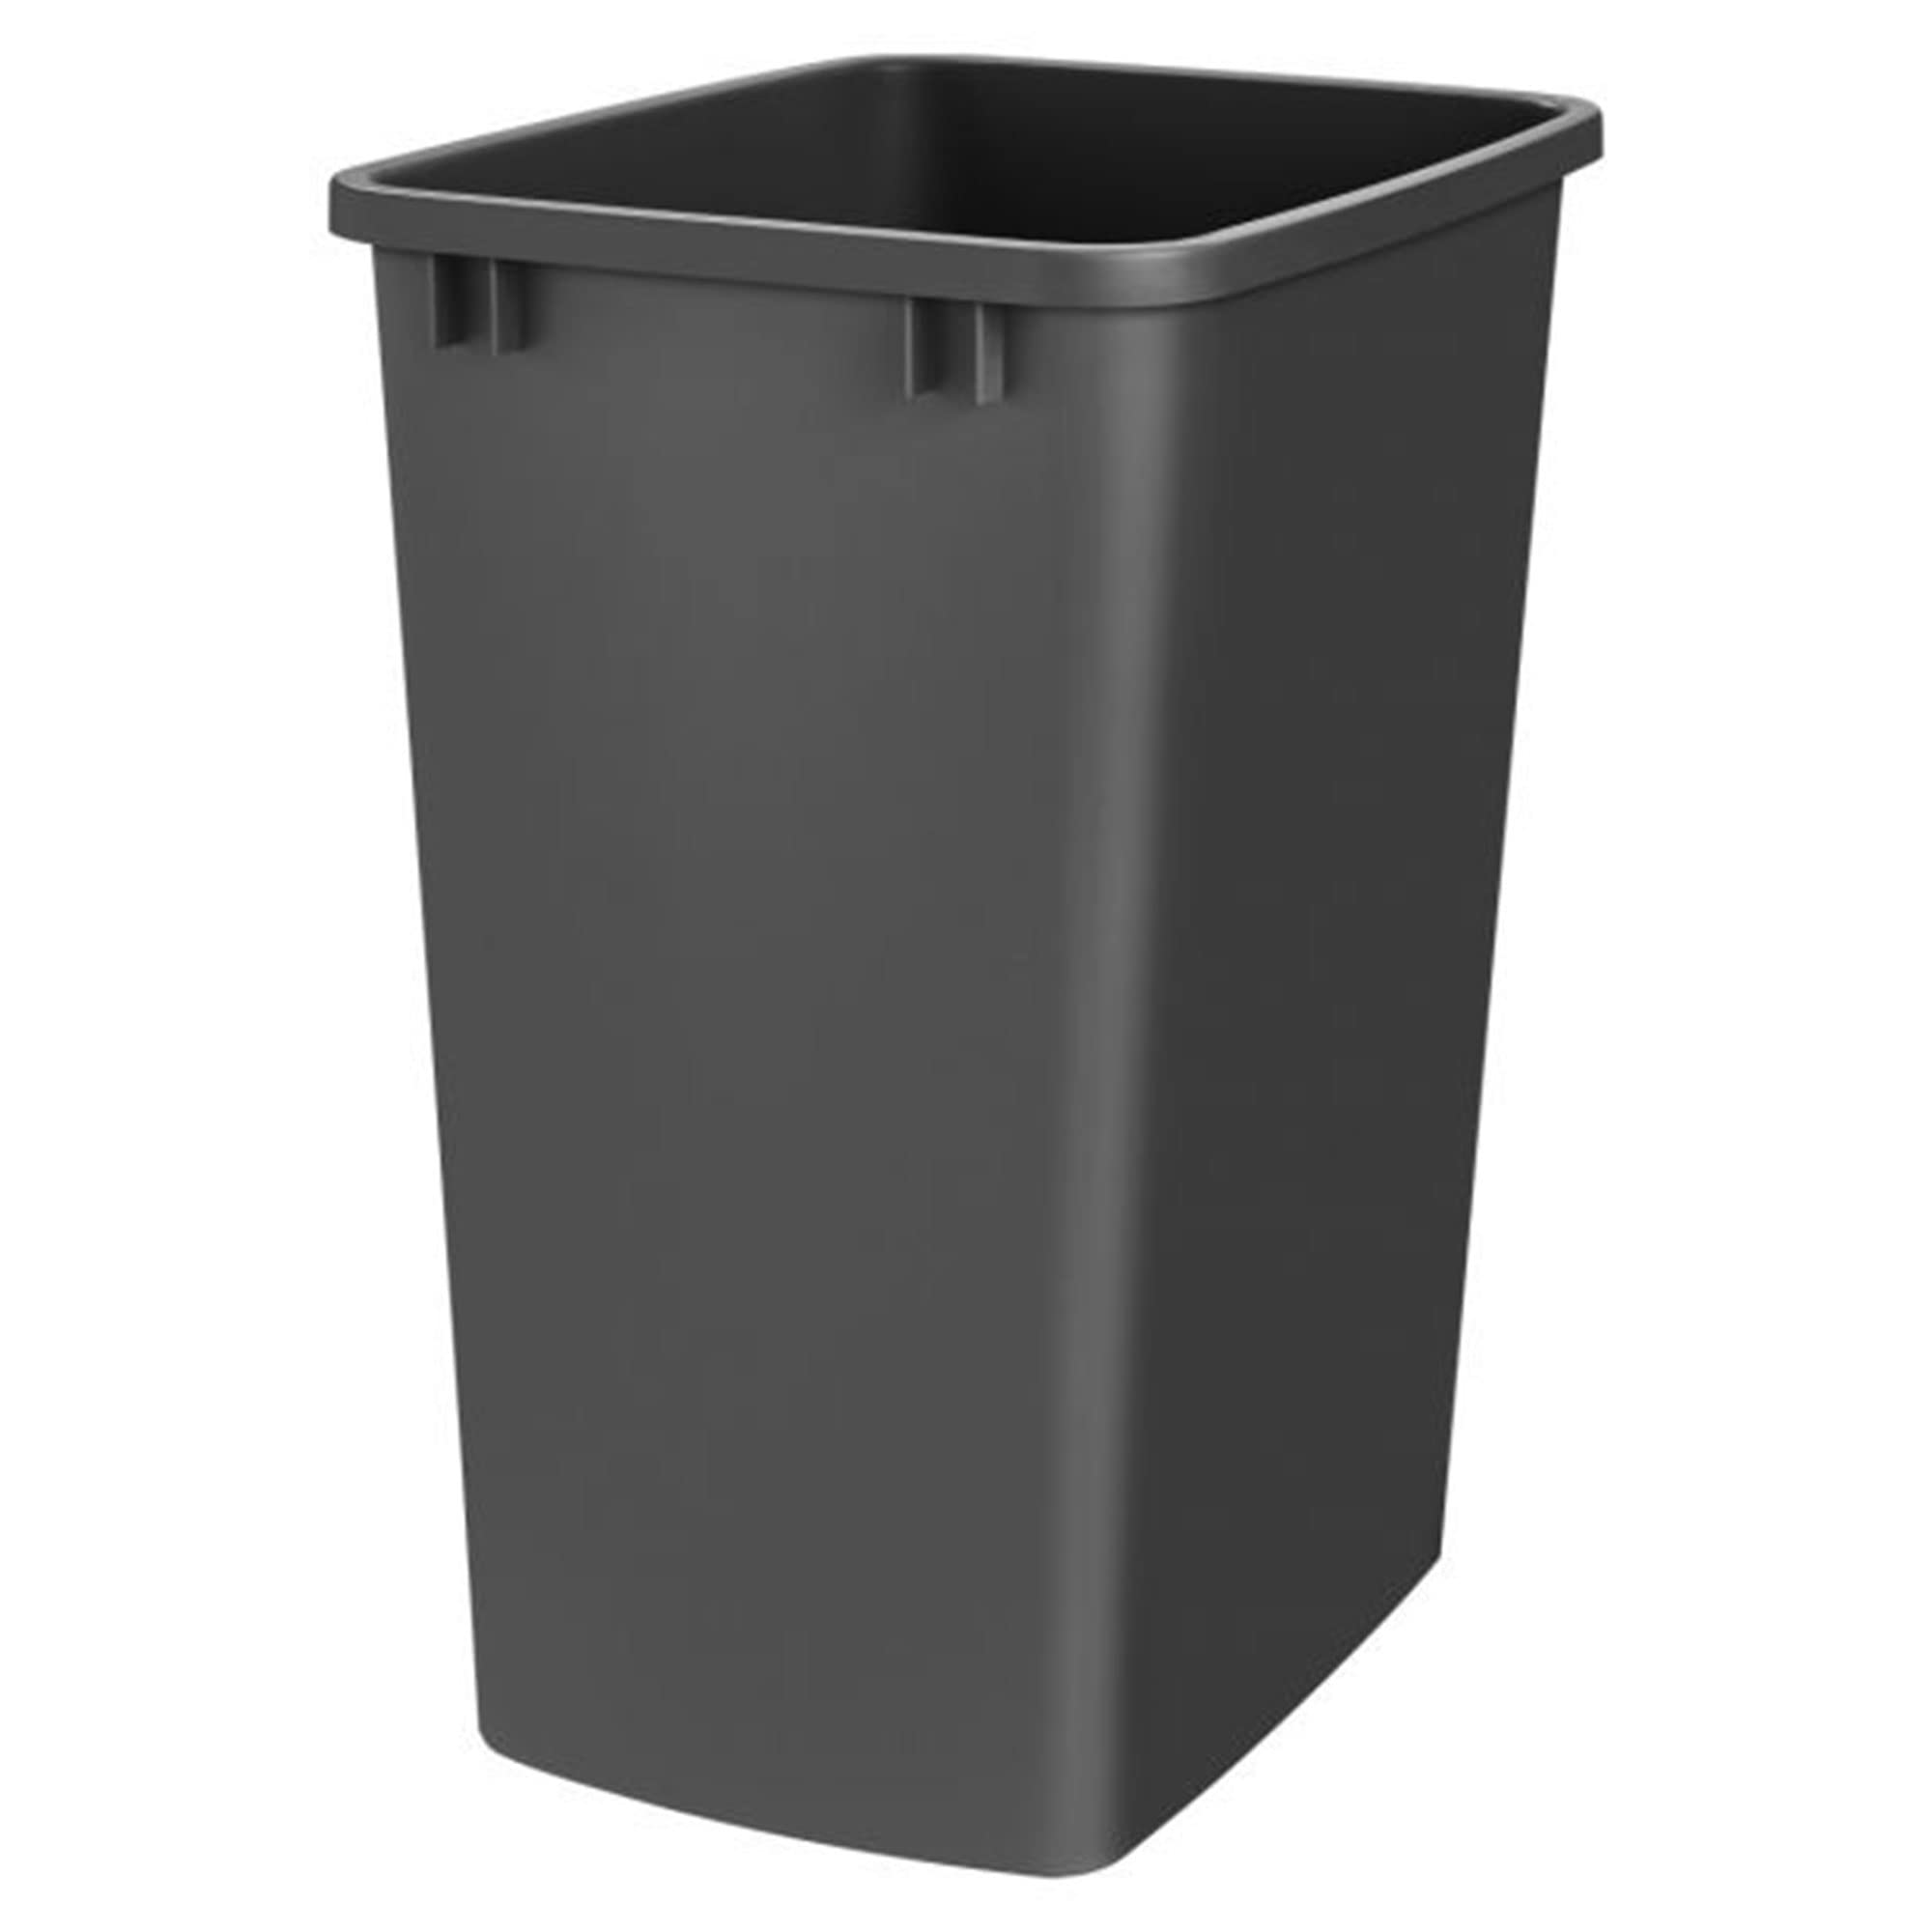 Rev-A-Shelf RV-35-18-52 35 Quart Plastic Replacement Waste Container Garbage Bin Trash Can for The Kitchen or Laundry Room, Black